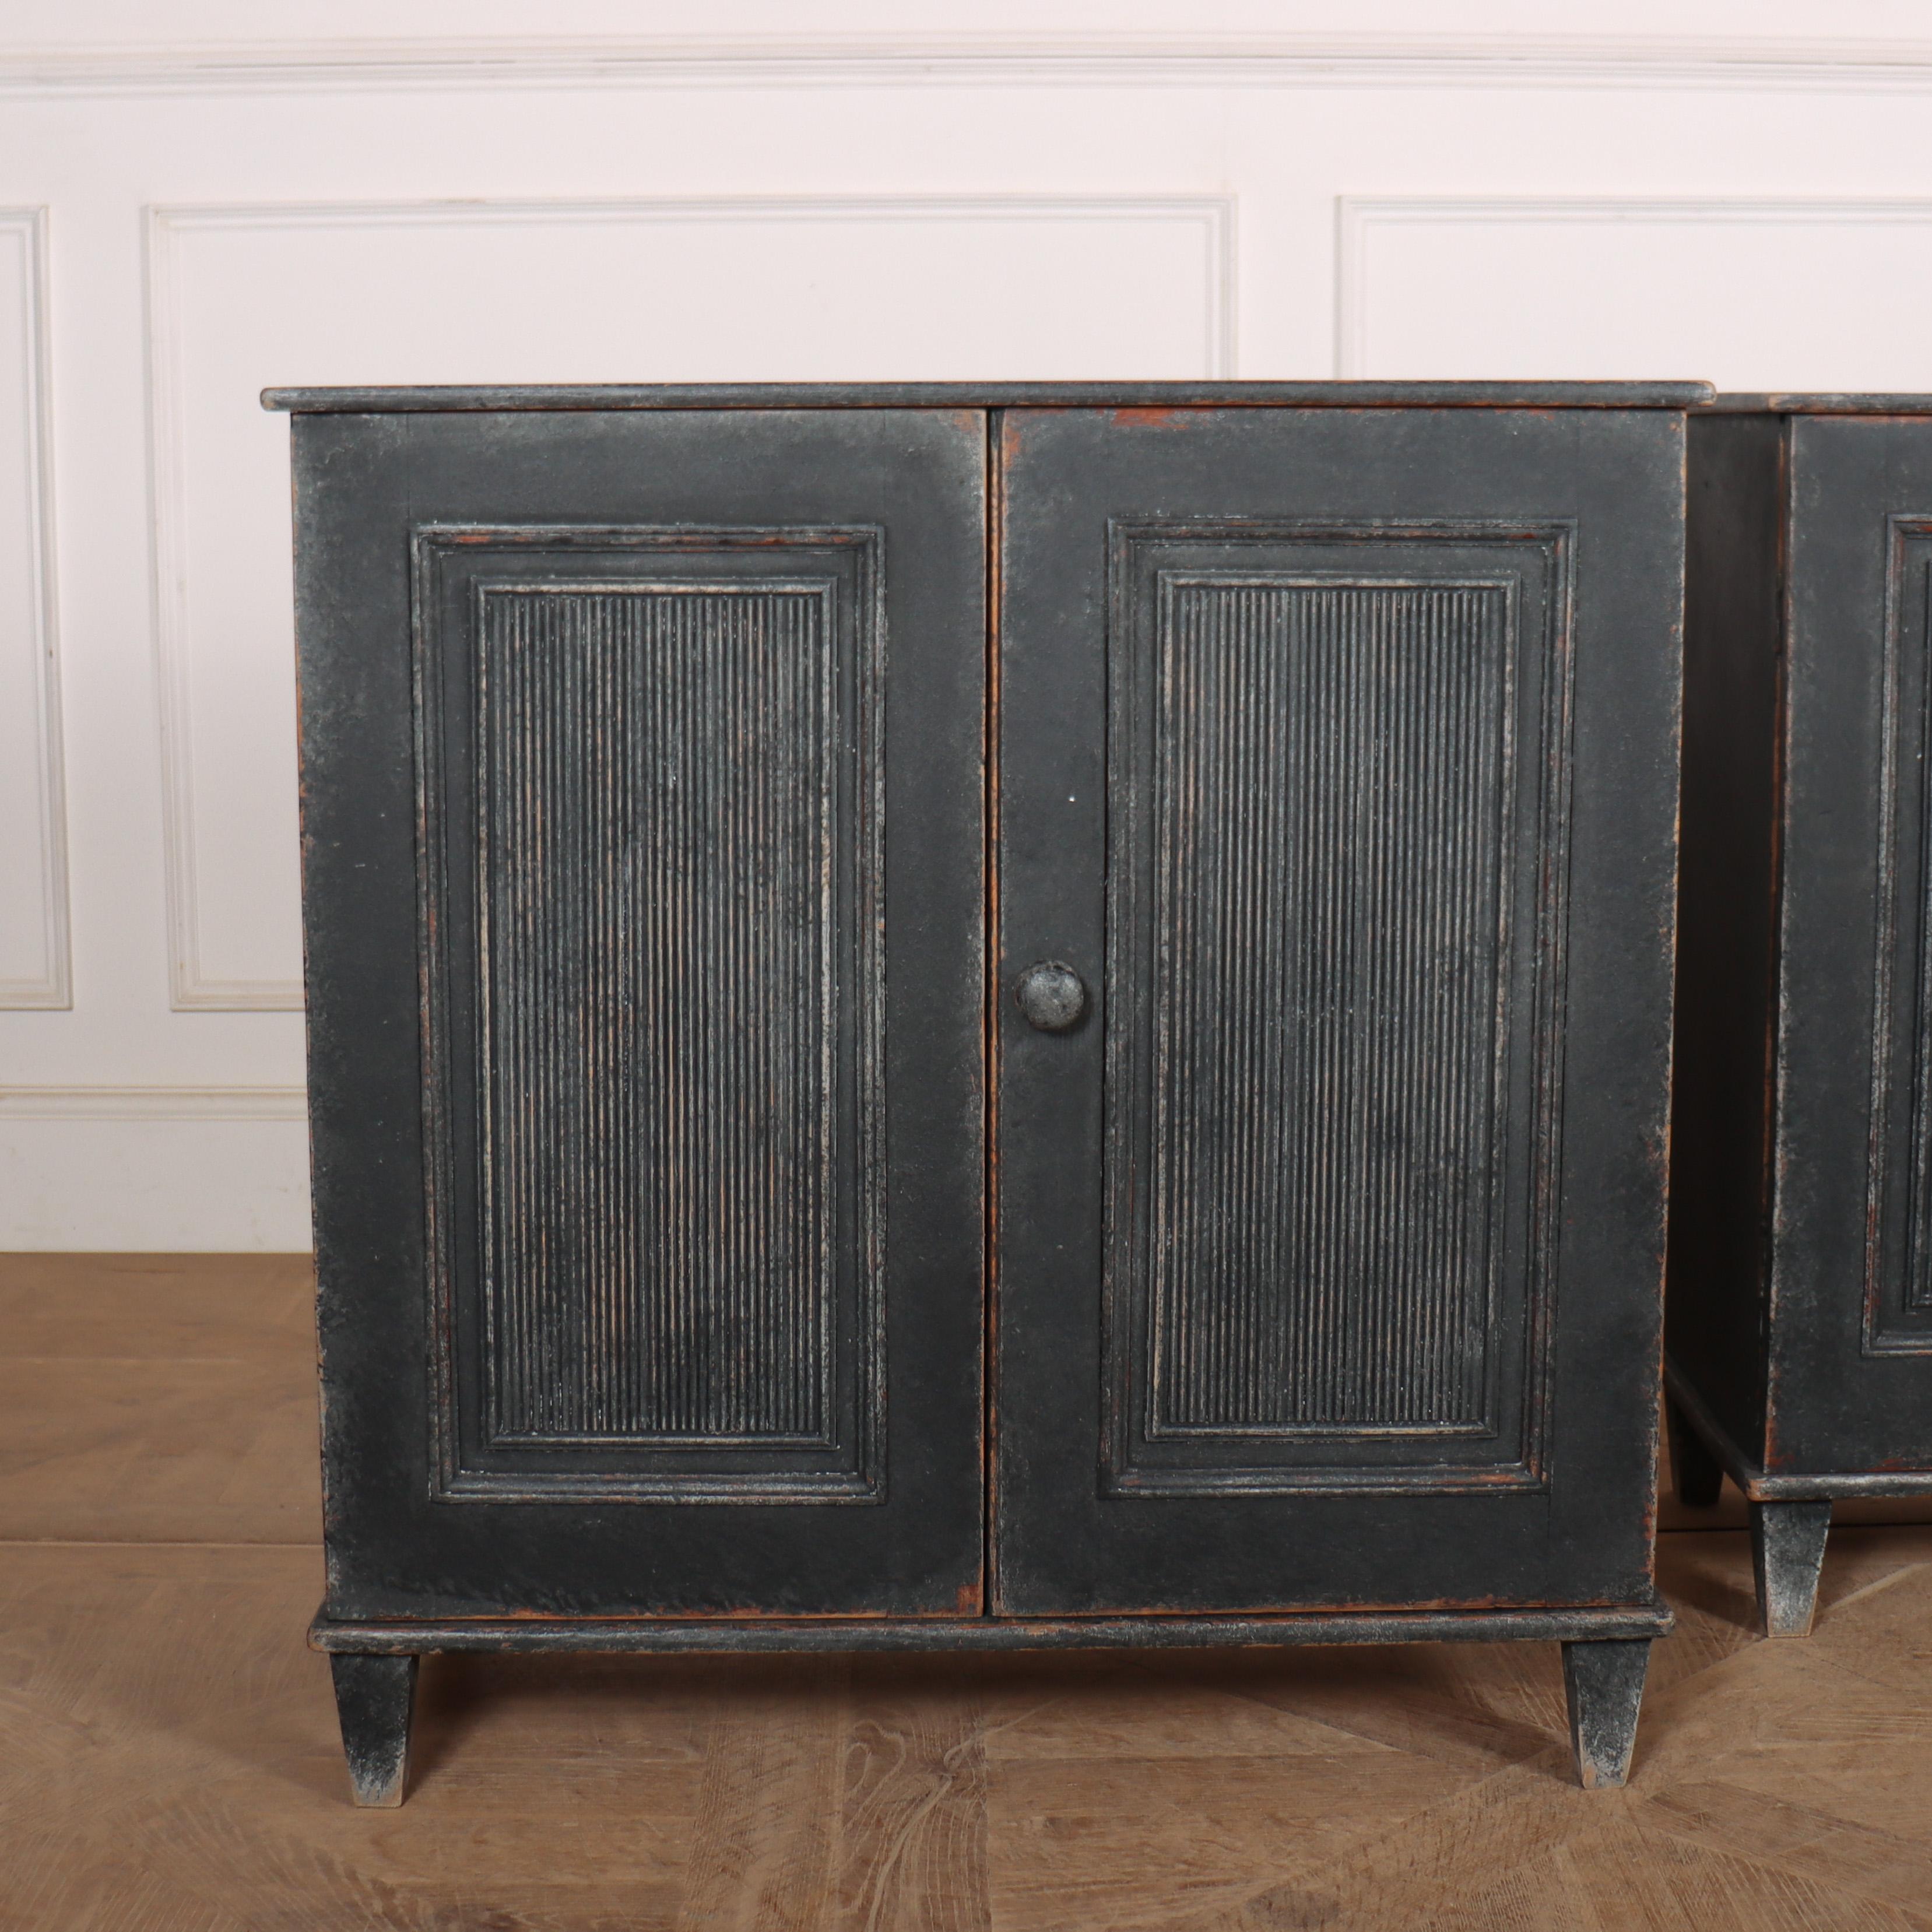 Pair of 19th C Swedish two door painted buffets with reeded door panels. 1840.

Reference: 8392

Dimensions
32 inches (81 cms) Wide
15 inches (38 cms) Deep
33 inches (84 cms) High